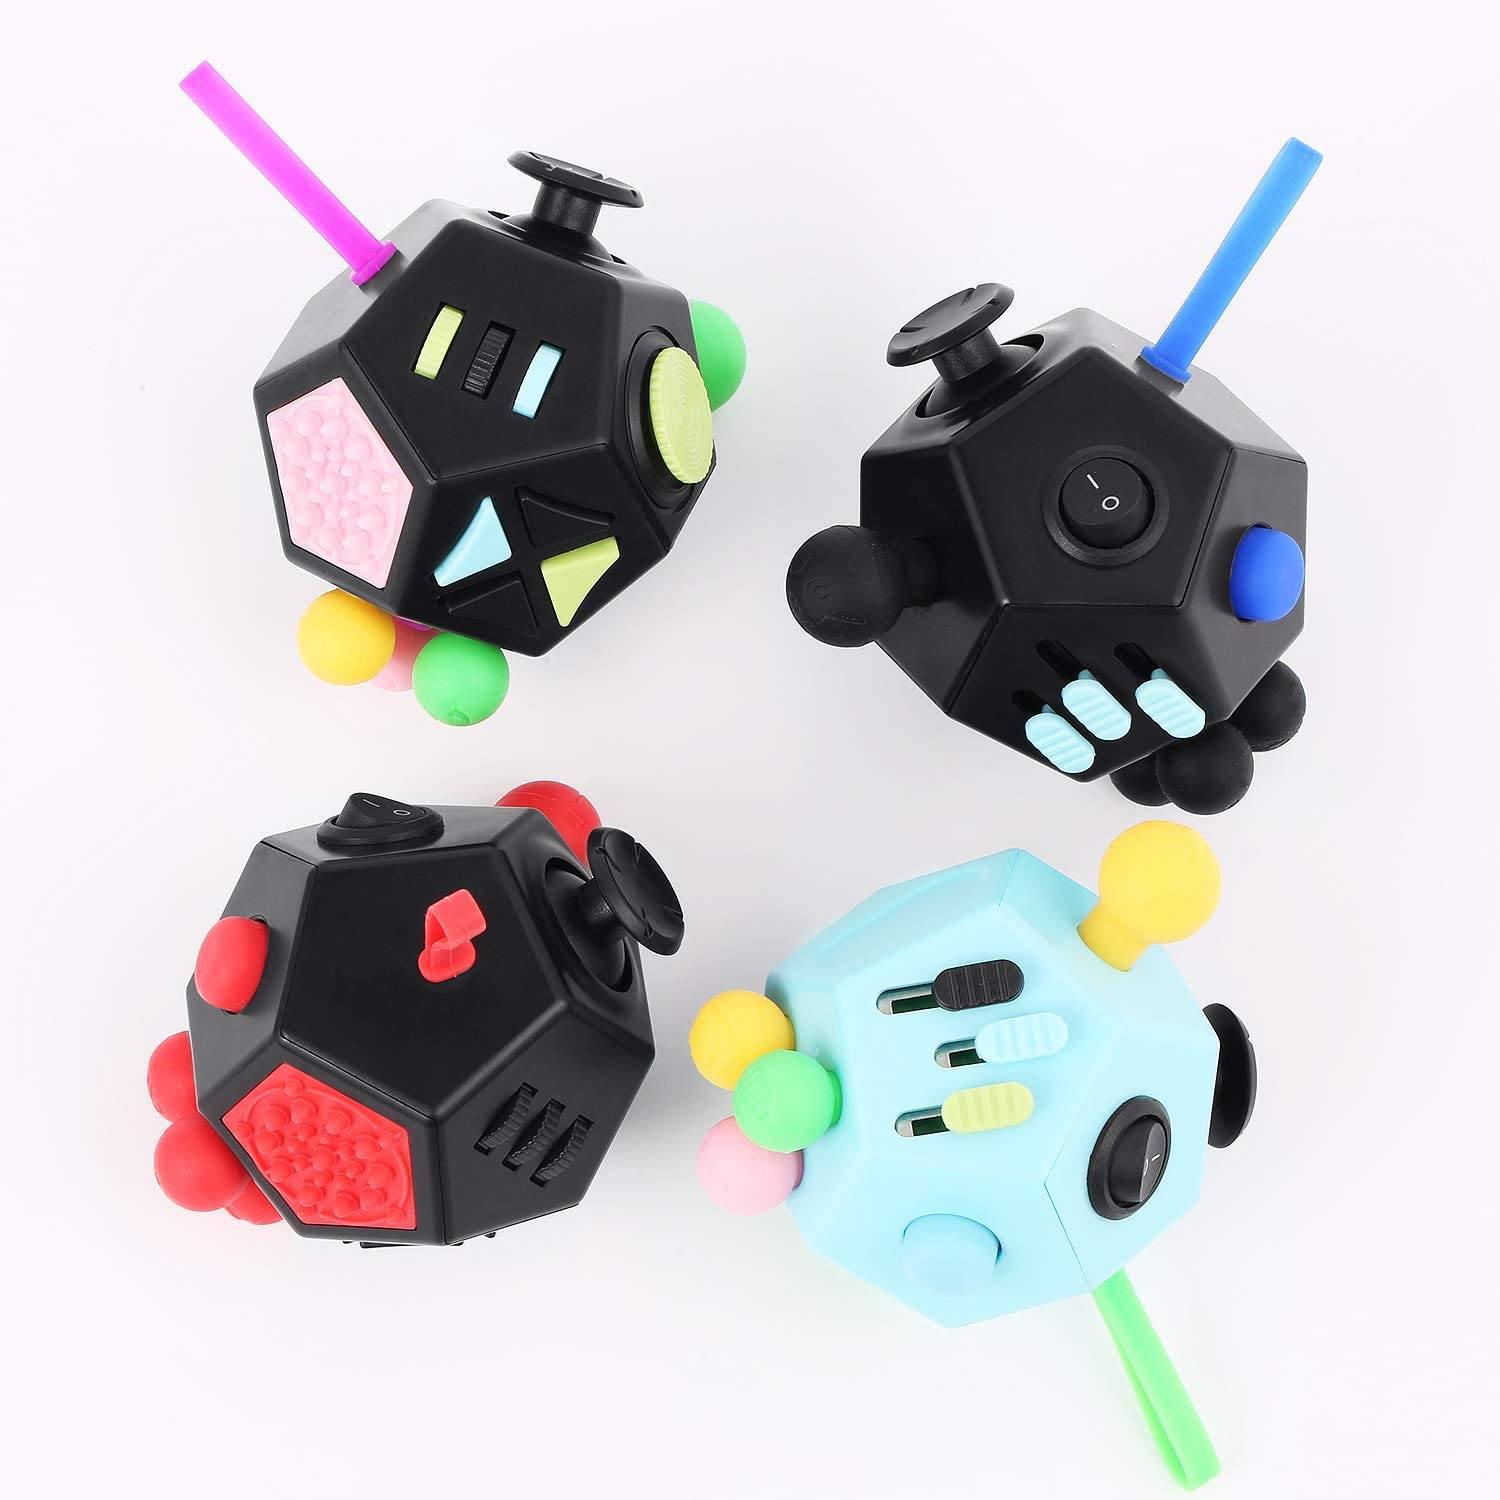 Stress and Anxiety Relief Depression Anti for All Ages with ADHD ADD OCD Autism Best Toy Black 12 Sided Fidget Cube Dodecagon Fidget Toy for Children and Adults